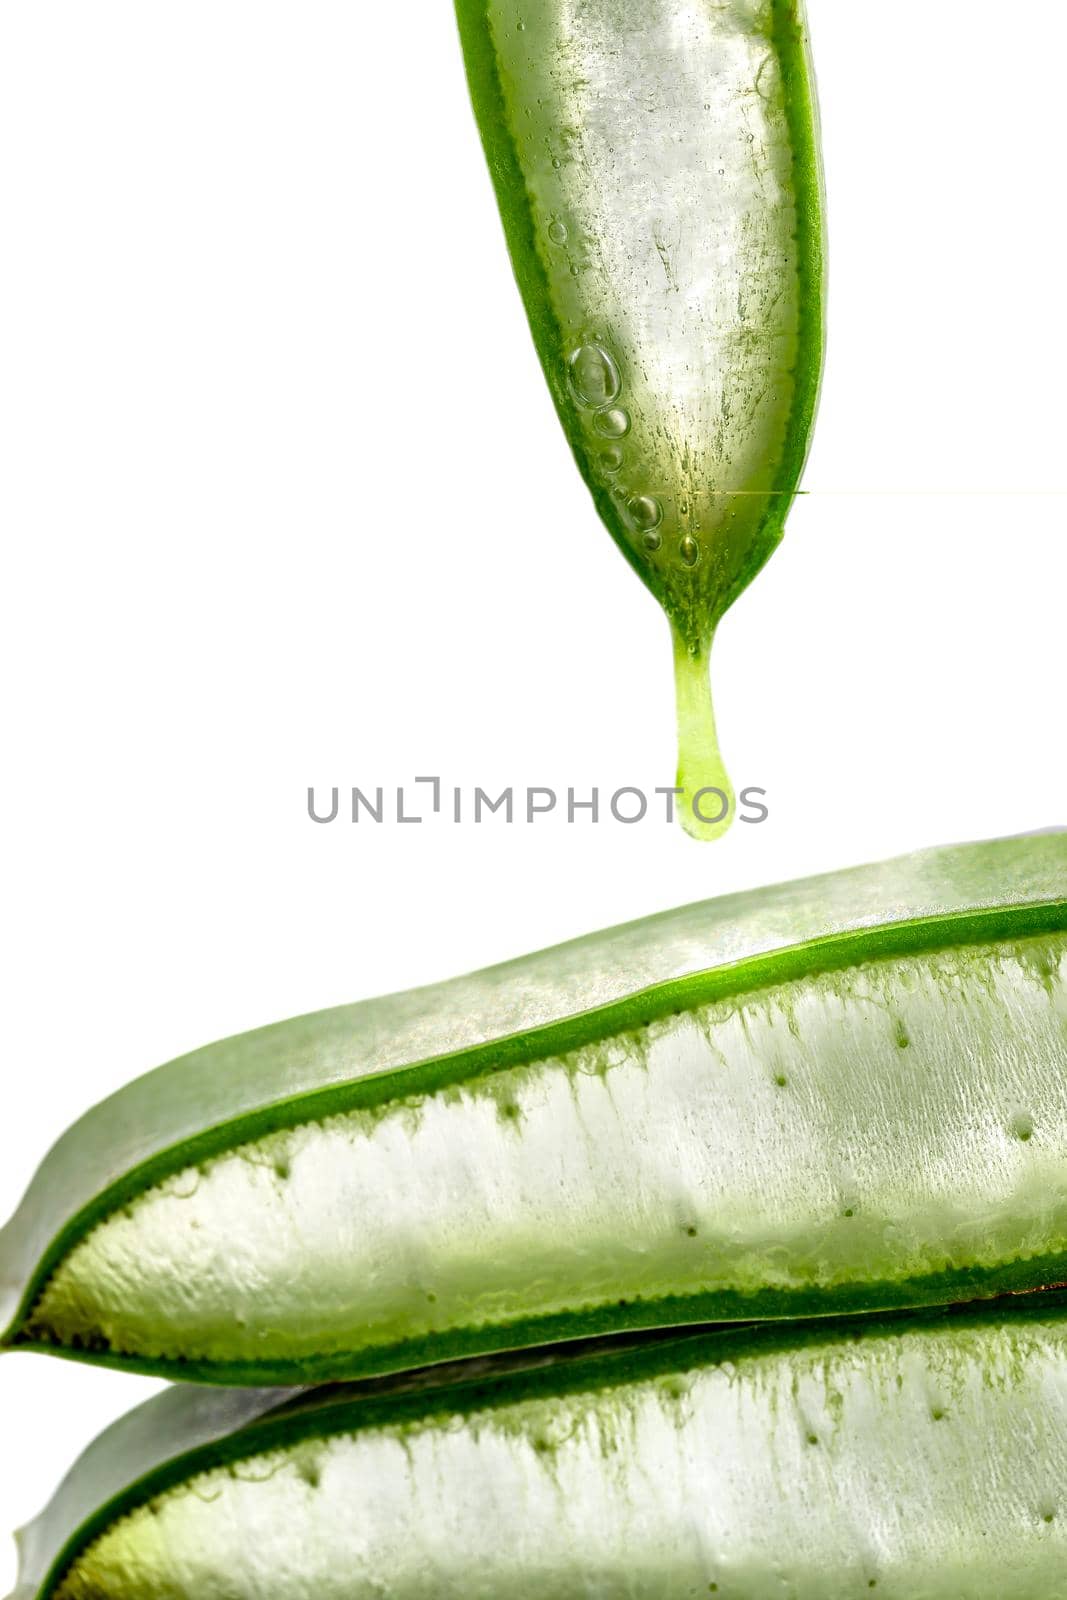 Pieces of the plant sliced transparently, a drop of gel falling